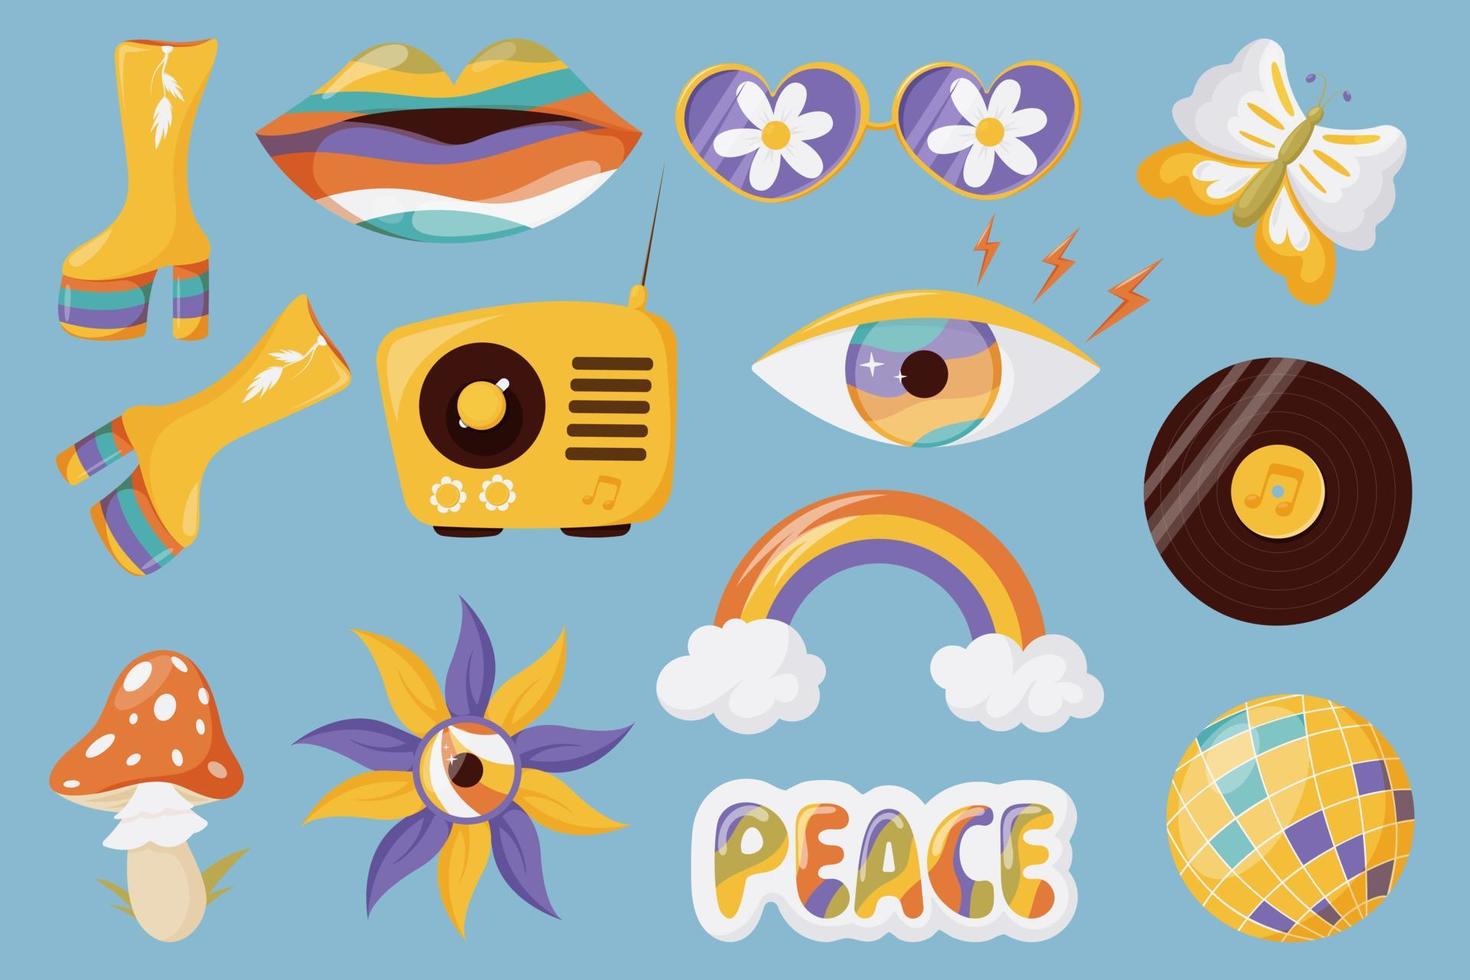 Groovy hippie 70s set. Rainbow with clouds, peace, fly agaric, lips, eye, record, radio, daisy glasses, roller skates, disco ball, butterfly, boots. Trendy retro psychedelic vector illustration.